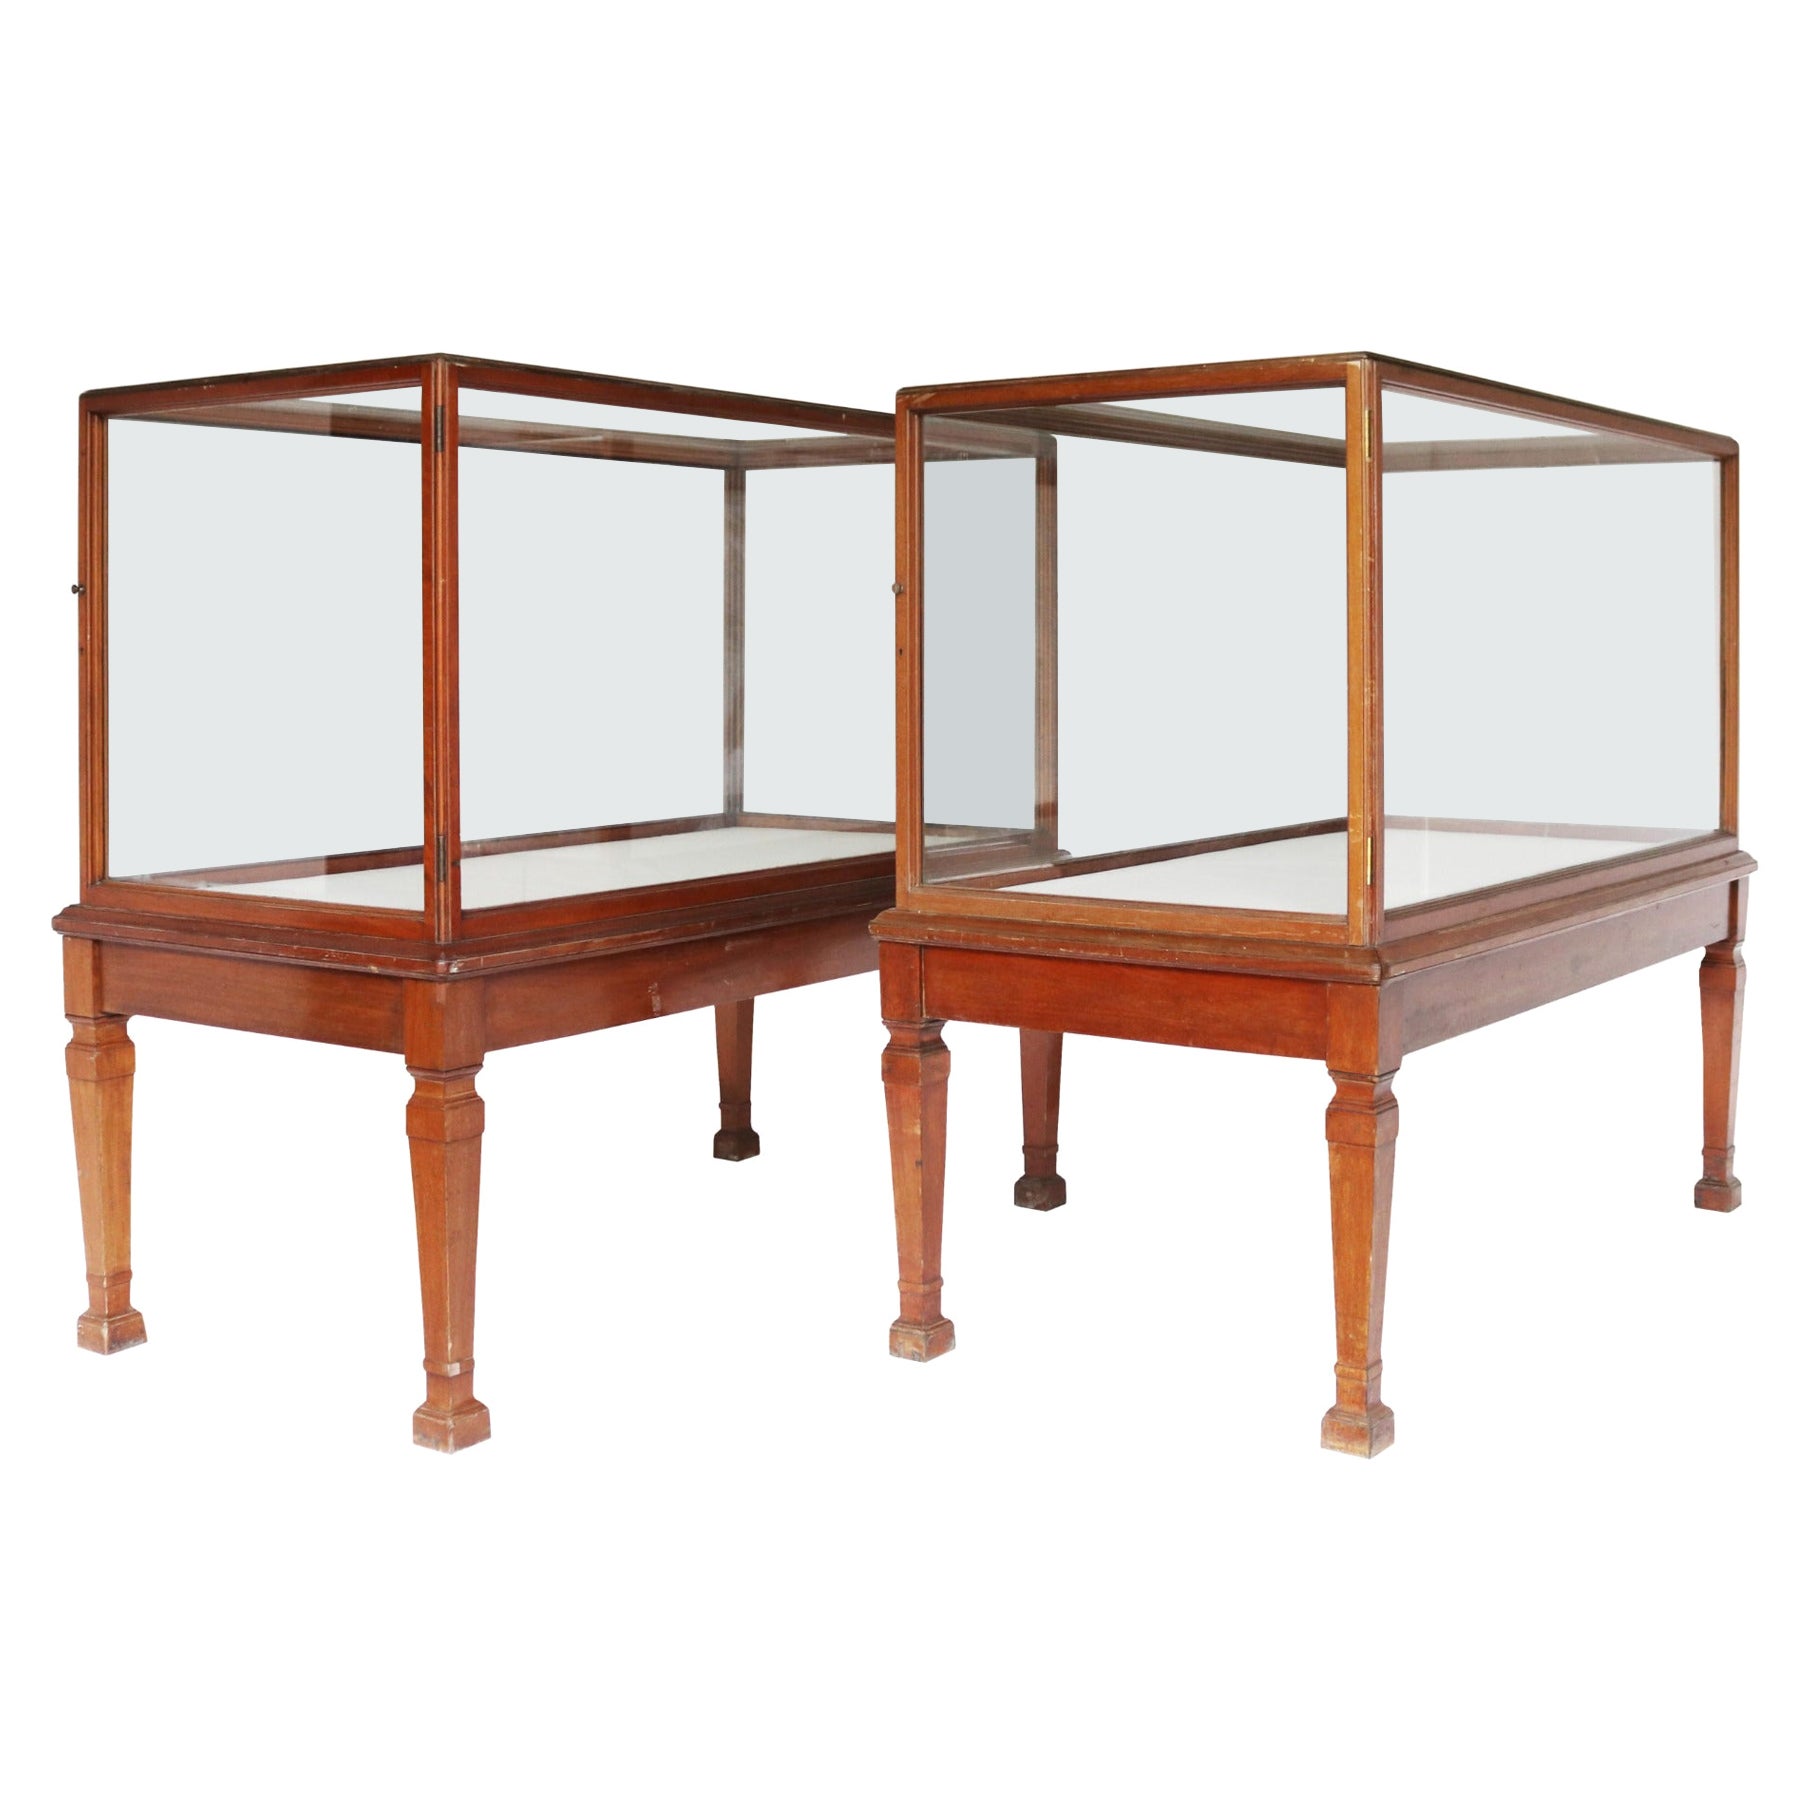 Two Antique Glazed Museum Display Cabinets